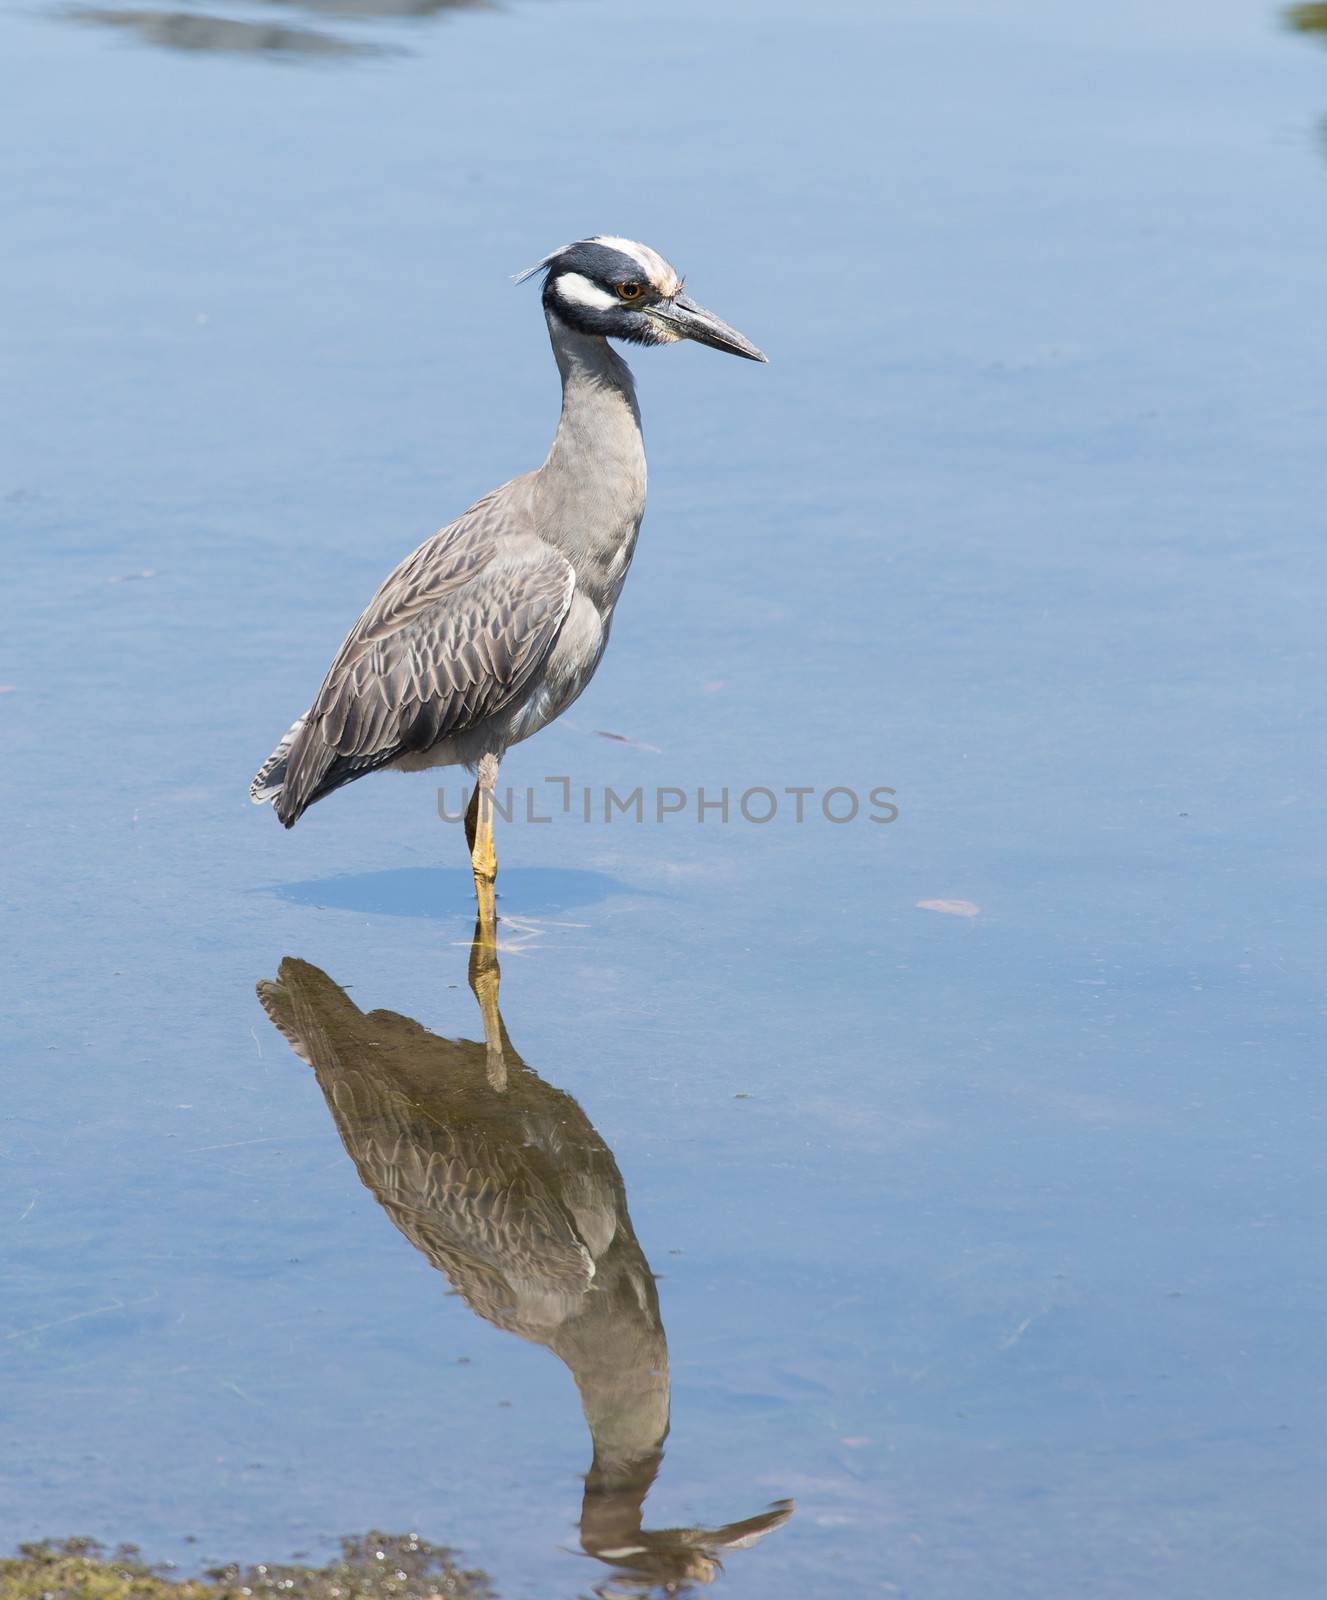 This Heron was at the Crystal River in Florida looking for some easy pickings.